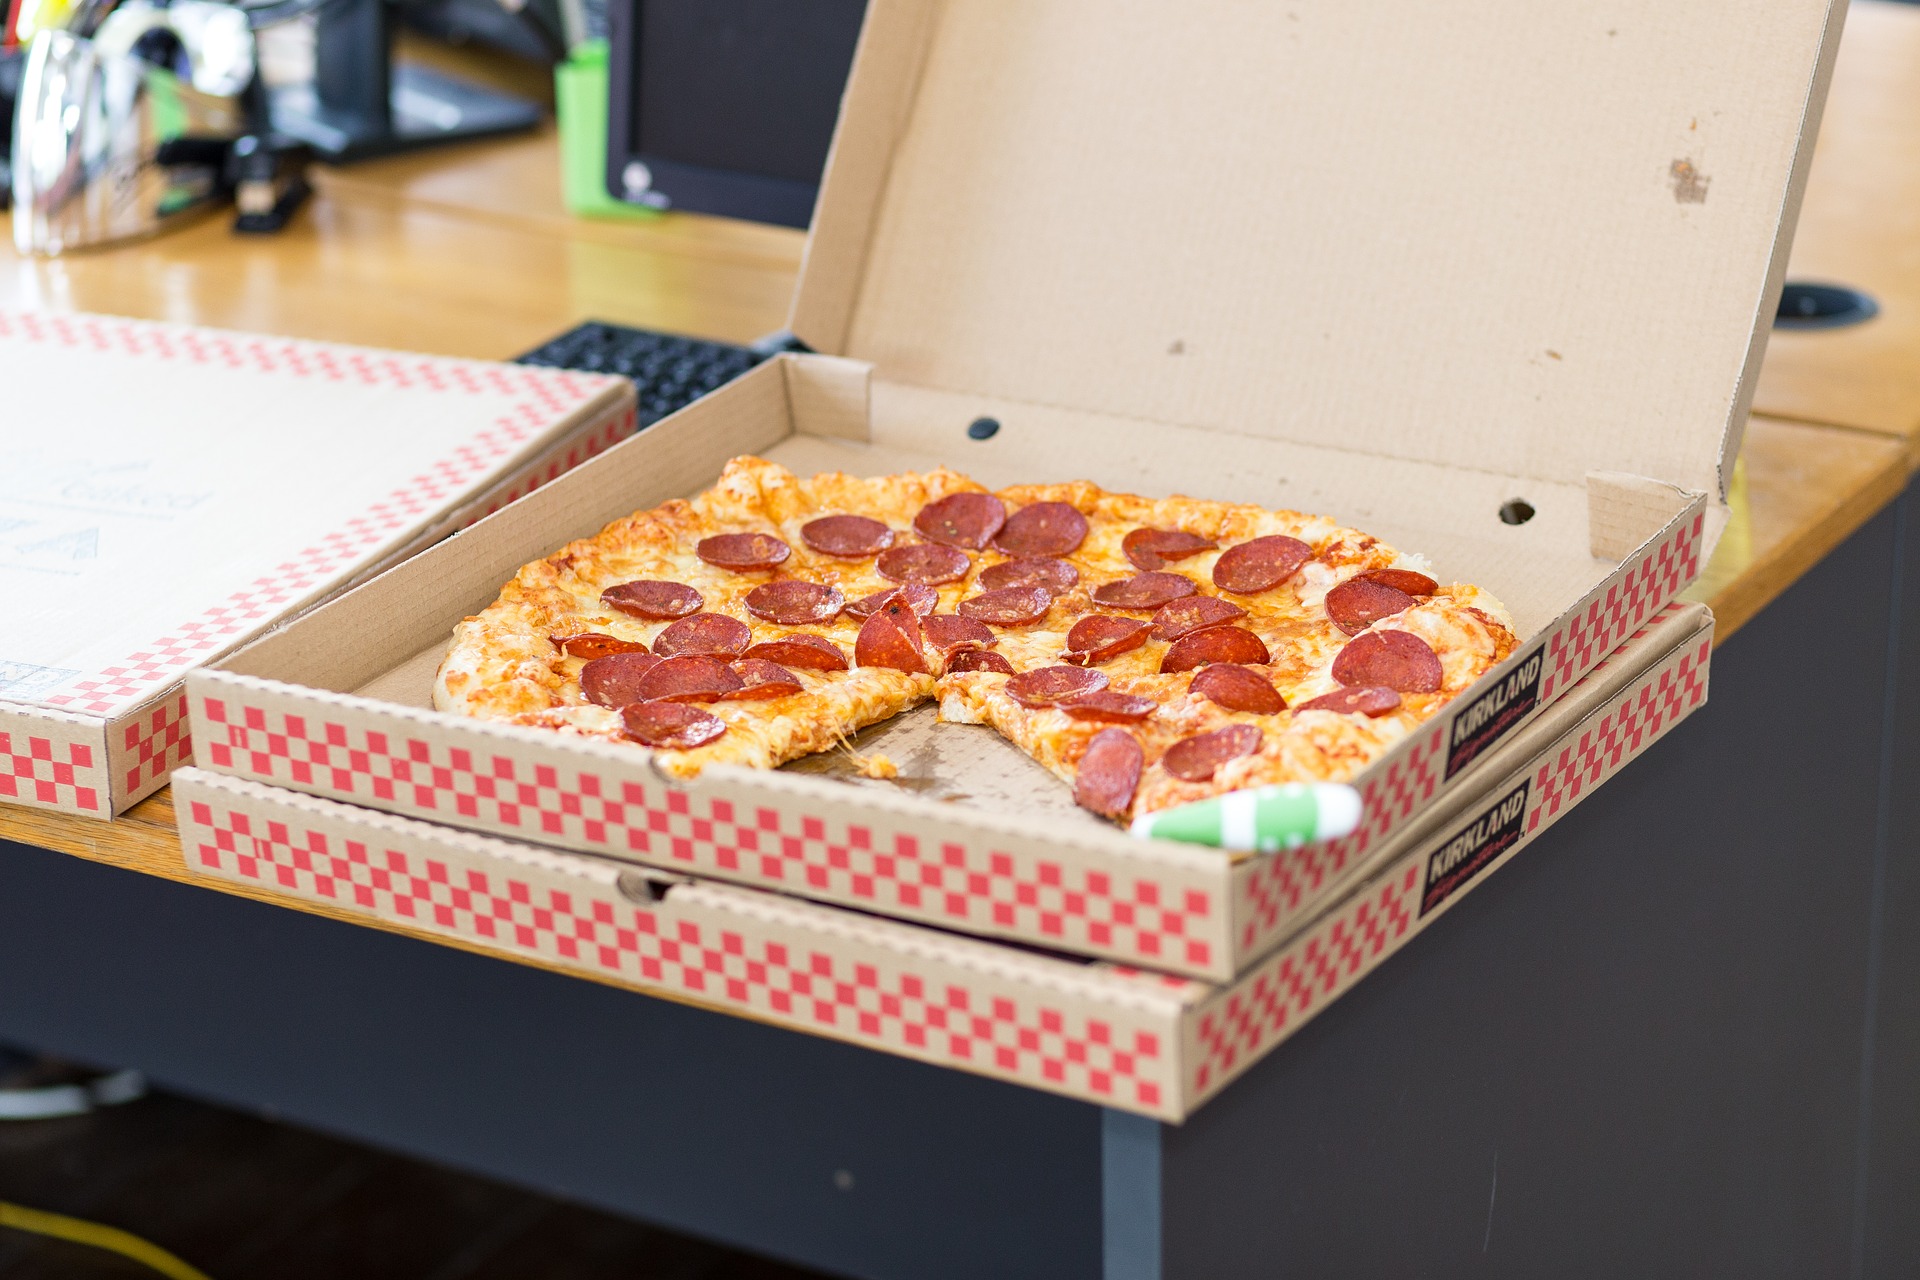 Open box showing pepperoni pizza